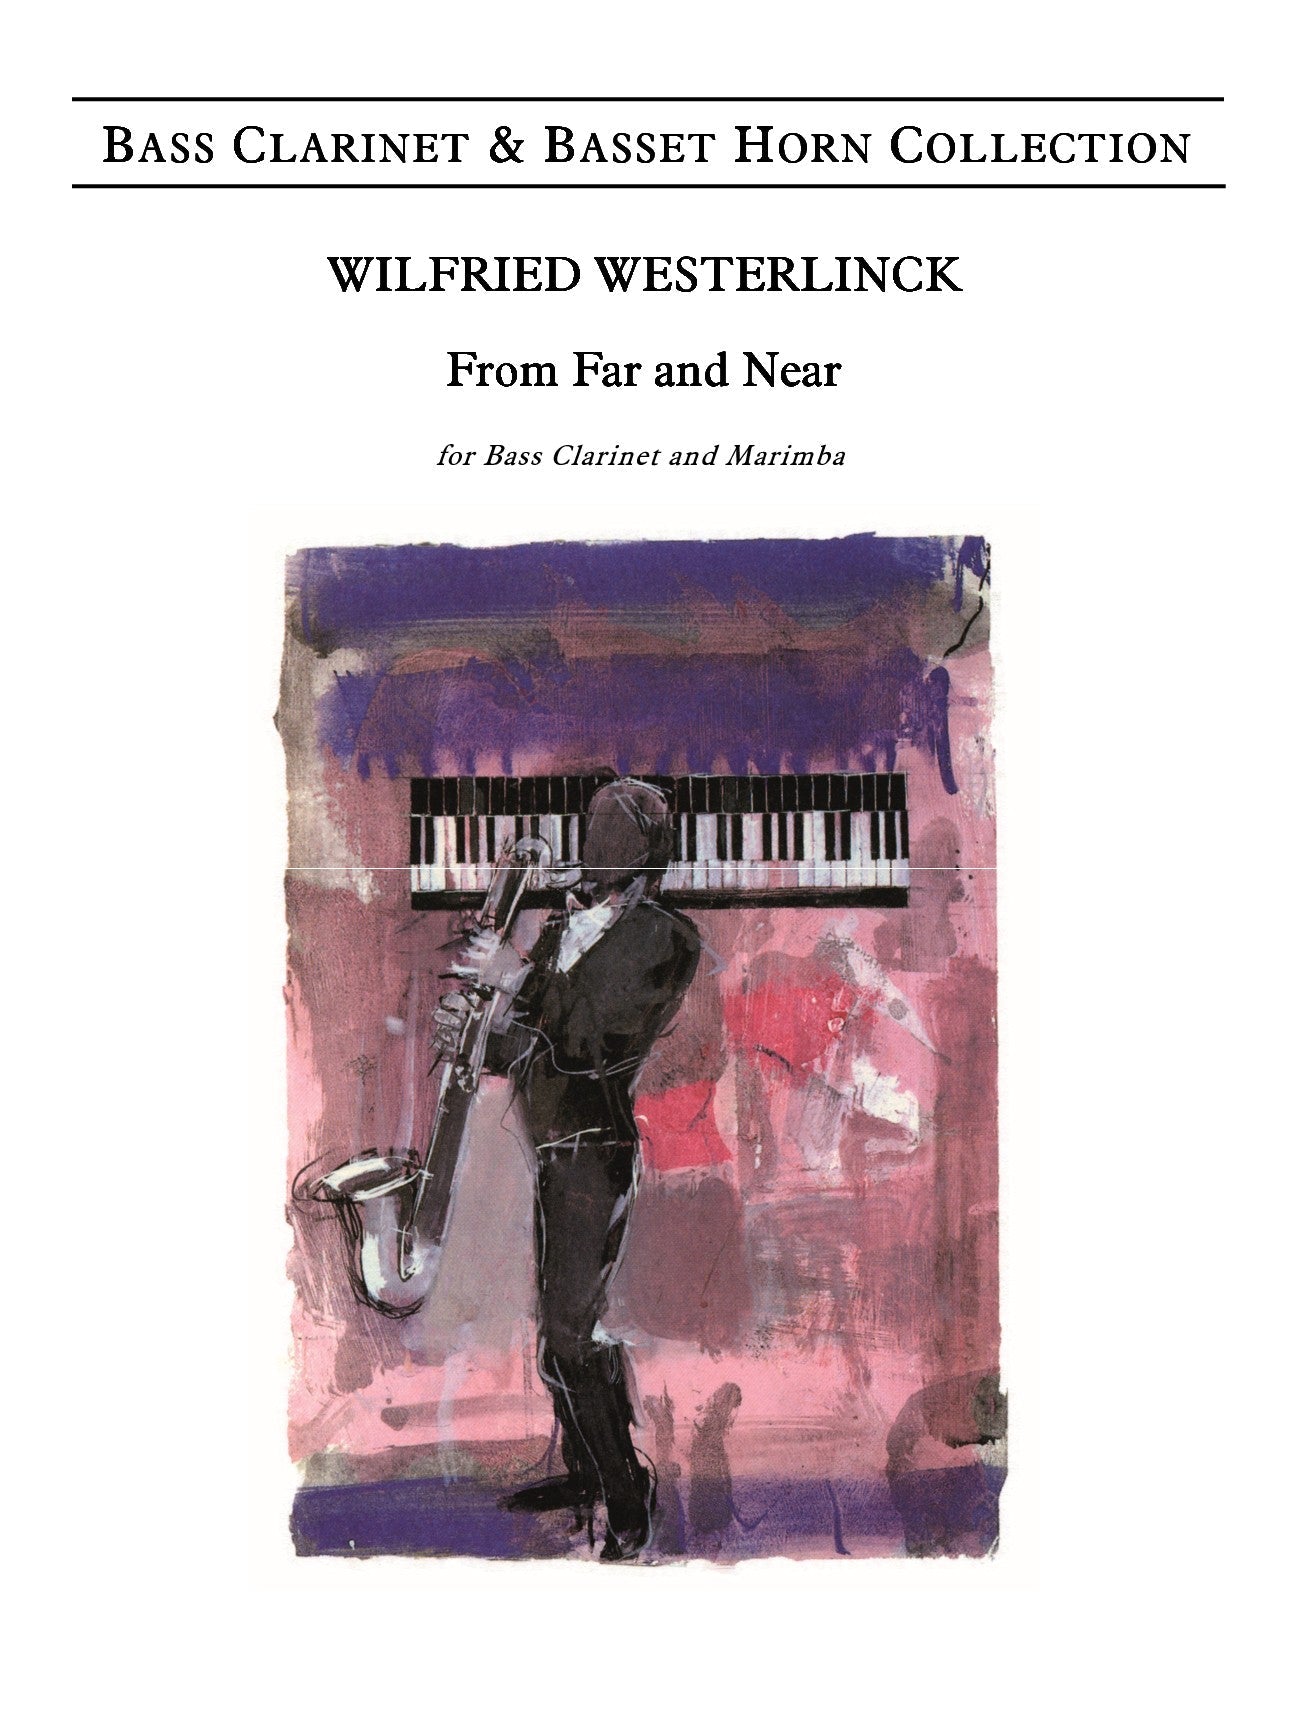 Westerlinck - From Far and Near for Bass Clarinet and Piano